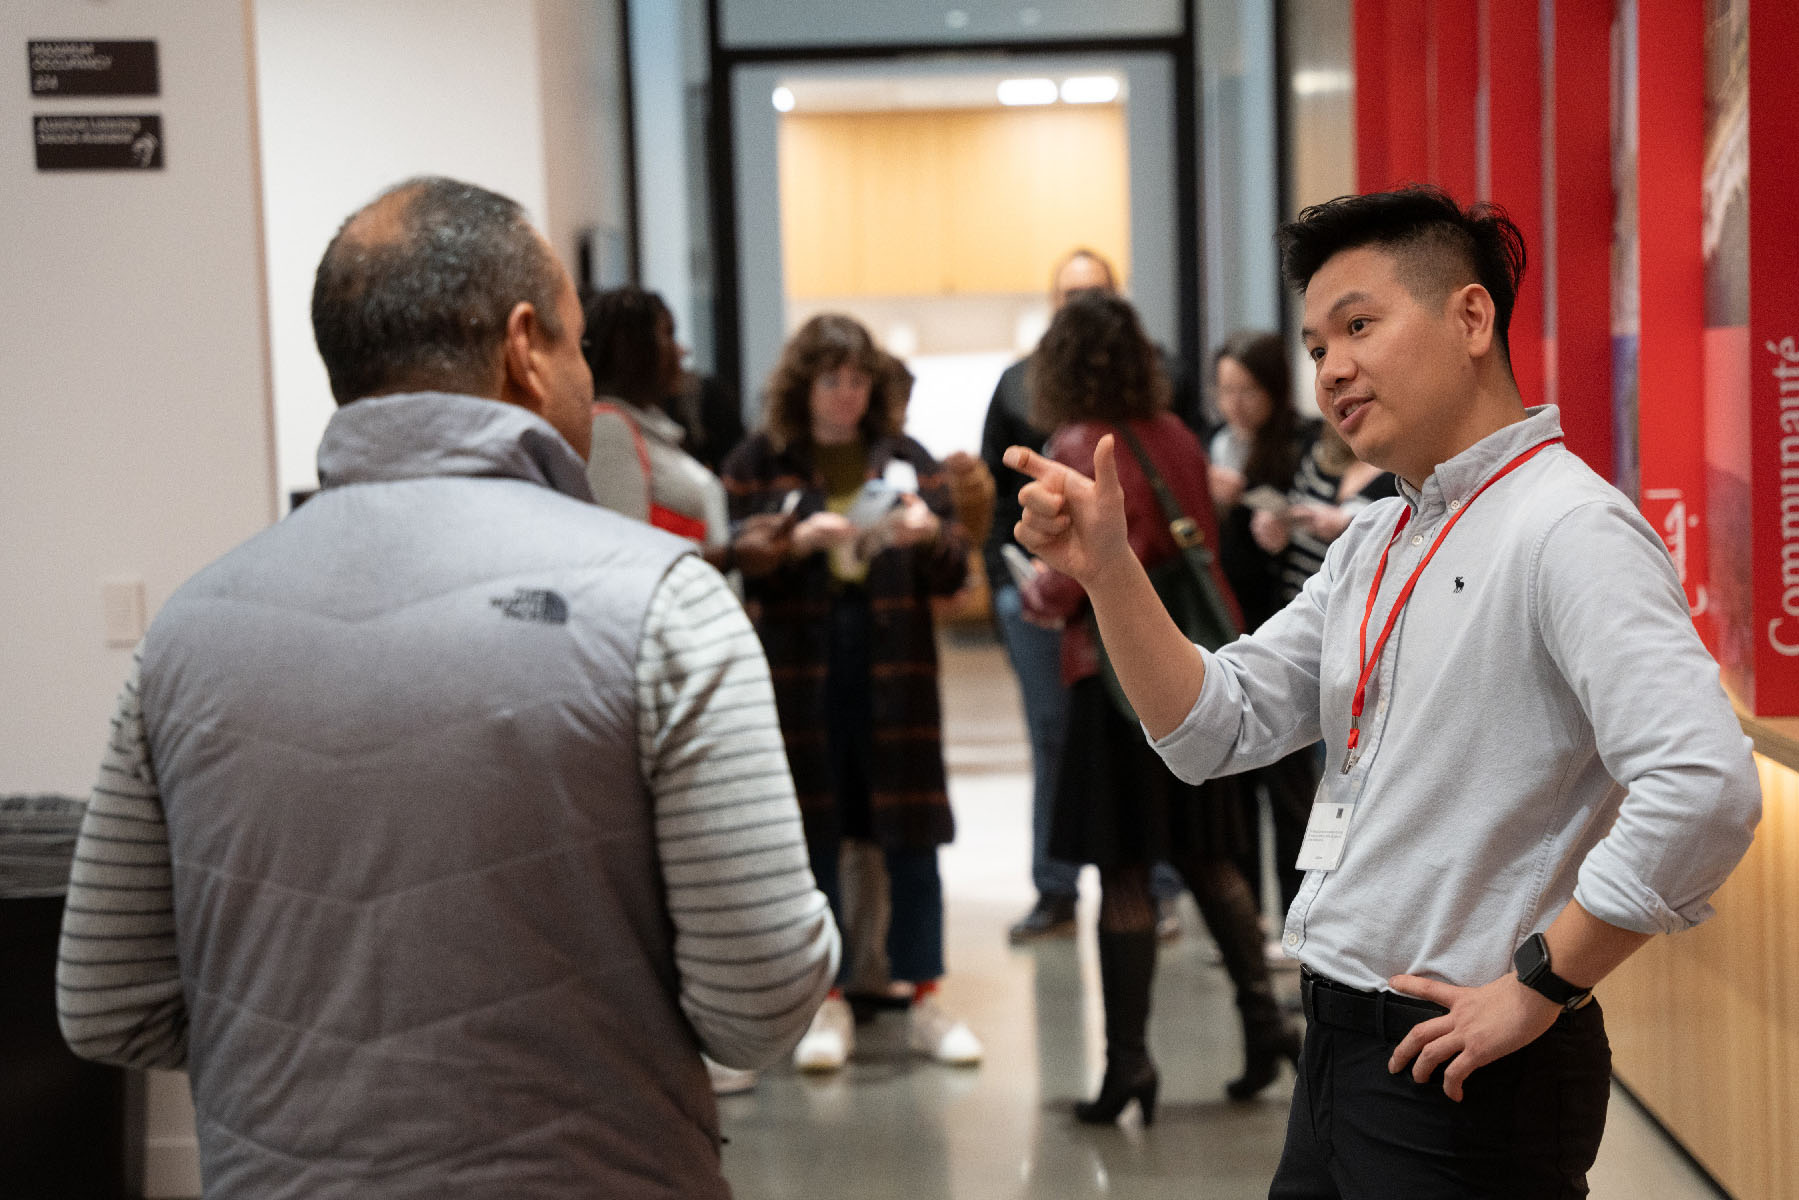 Community Programs Manager Jeremy Nguyen welcomes a community member to an Open House in the CZI Community Space.